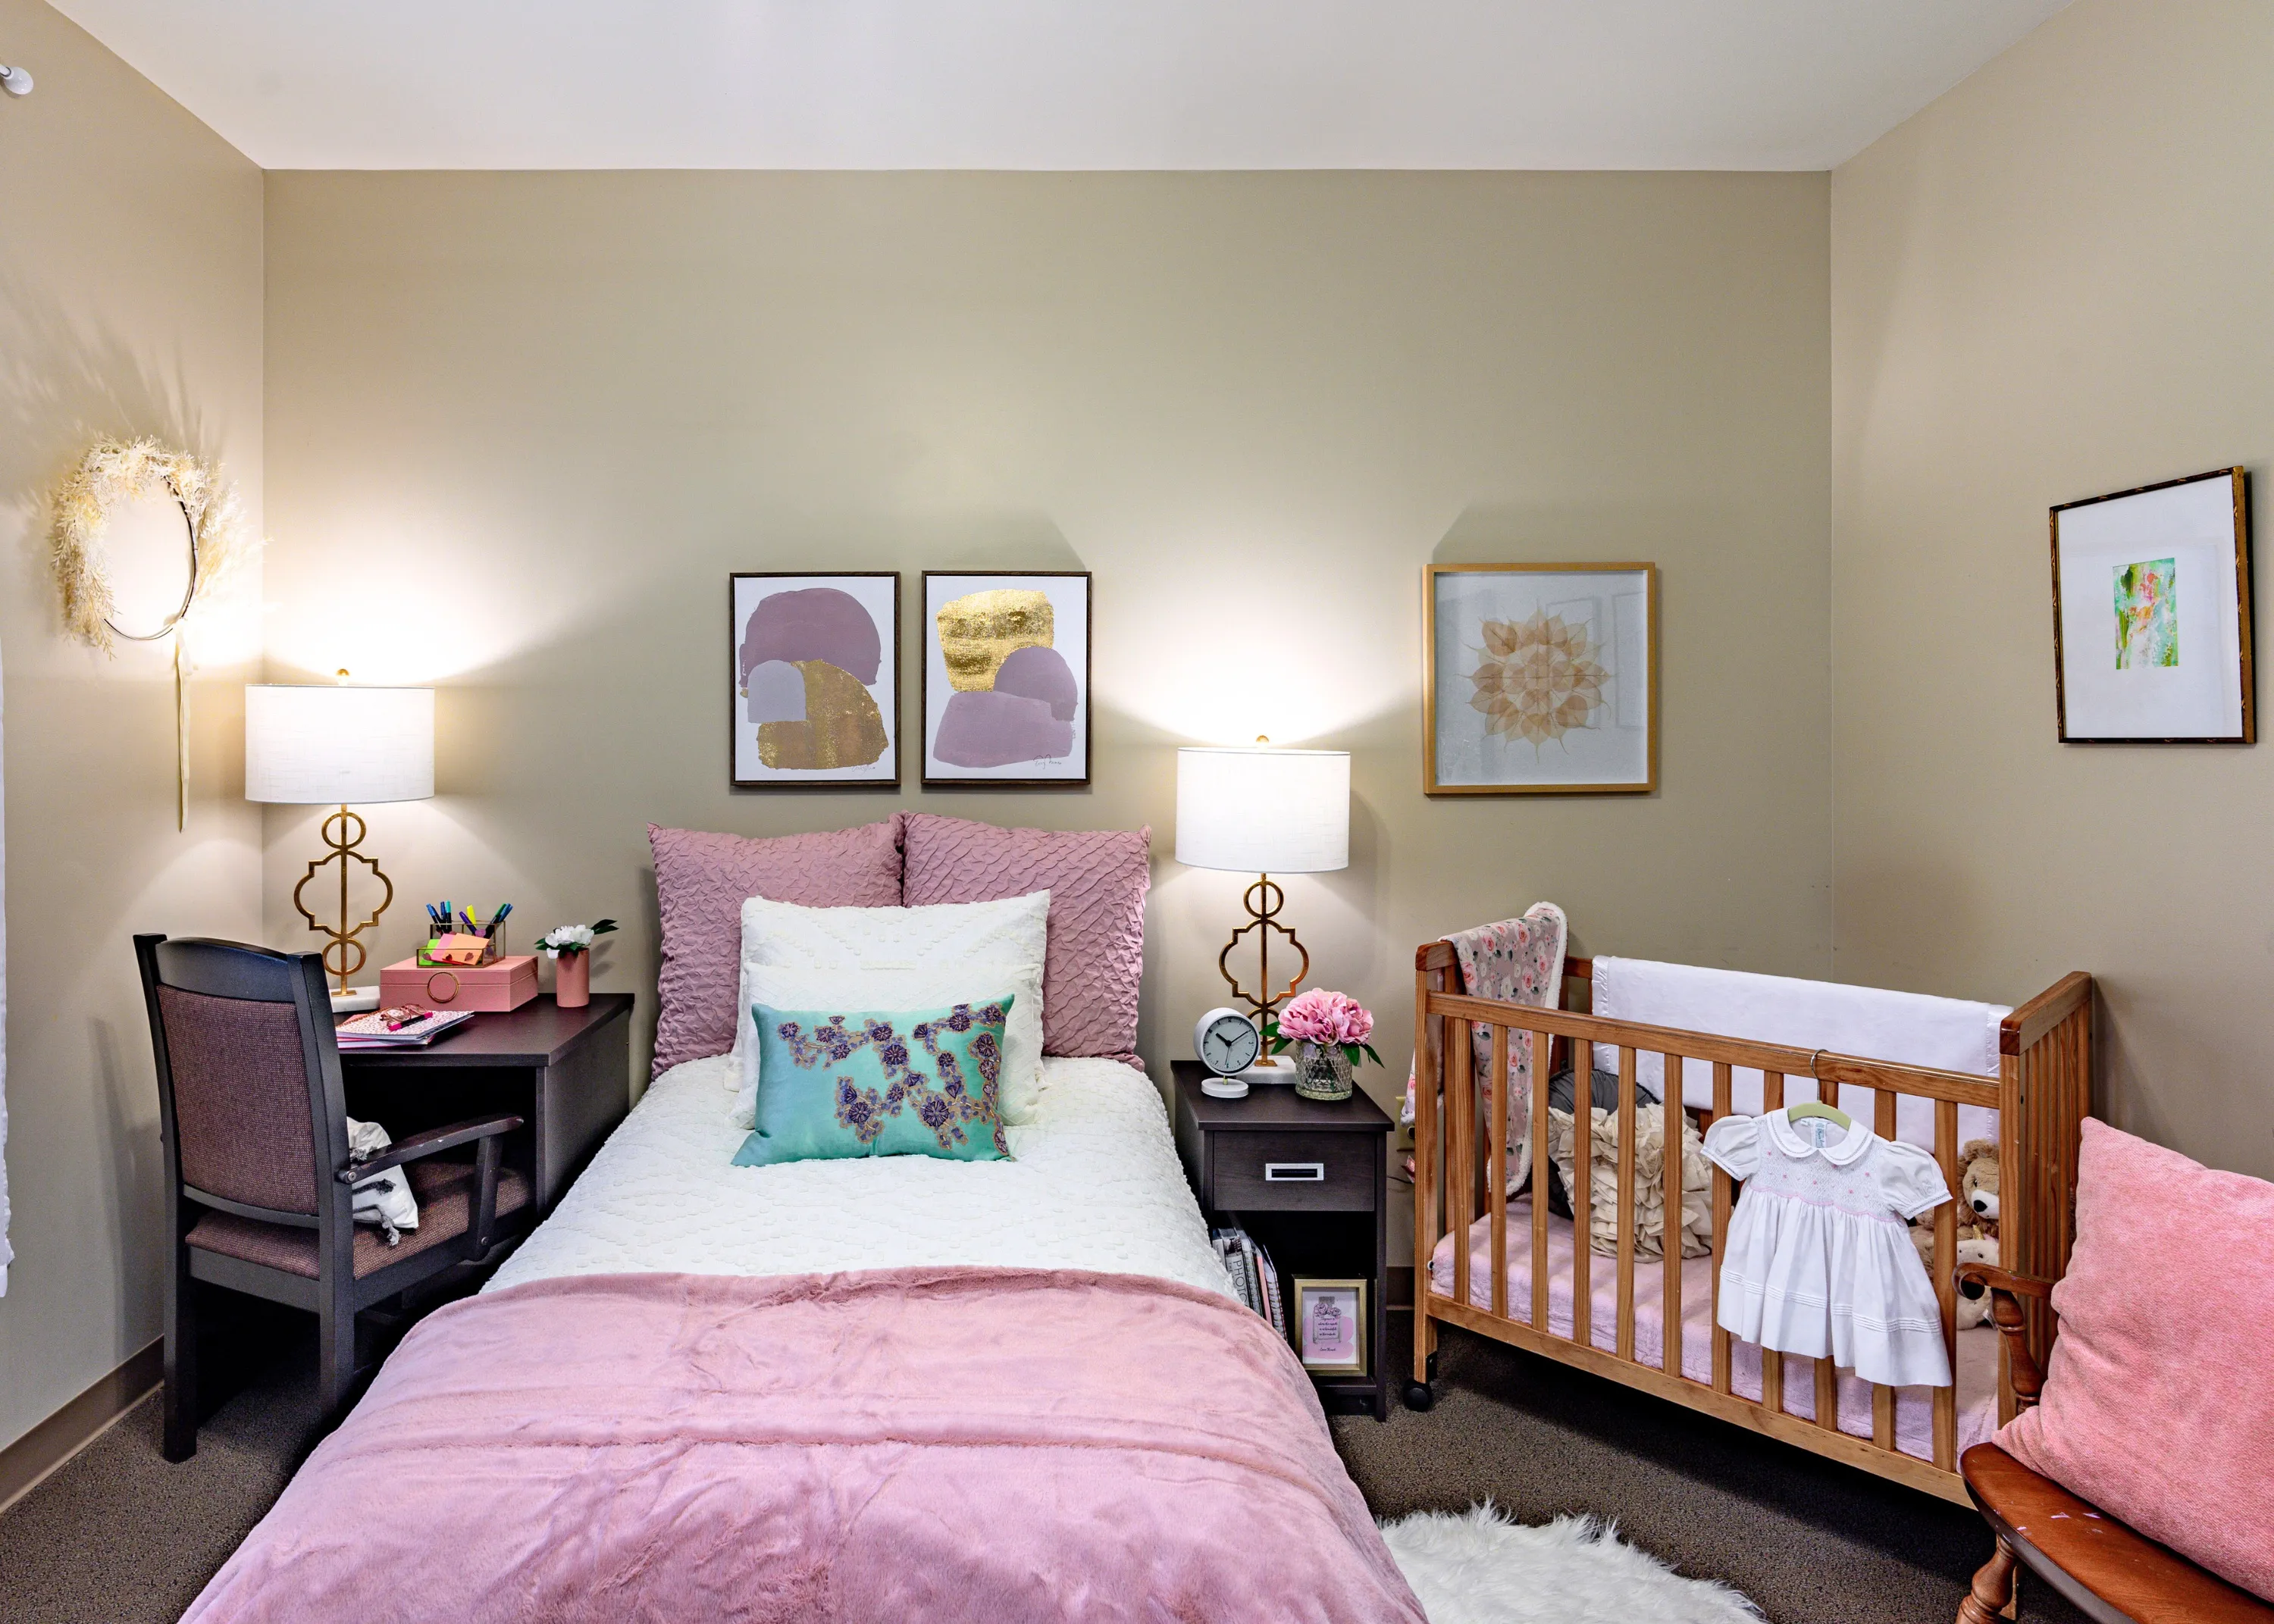 A room at MiraVia maternity home in North Carolina is ready to welcome an expectant mother and her child.?w=200&h=150